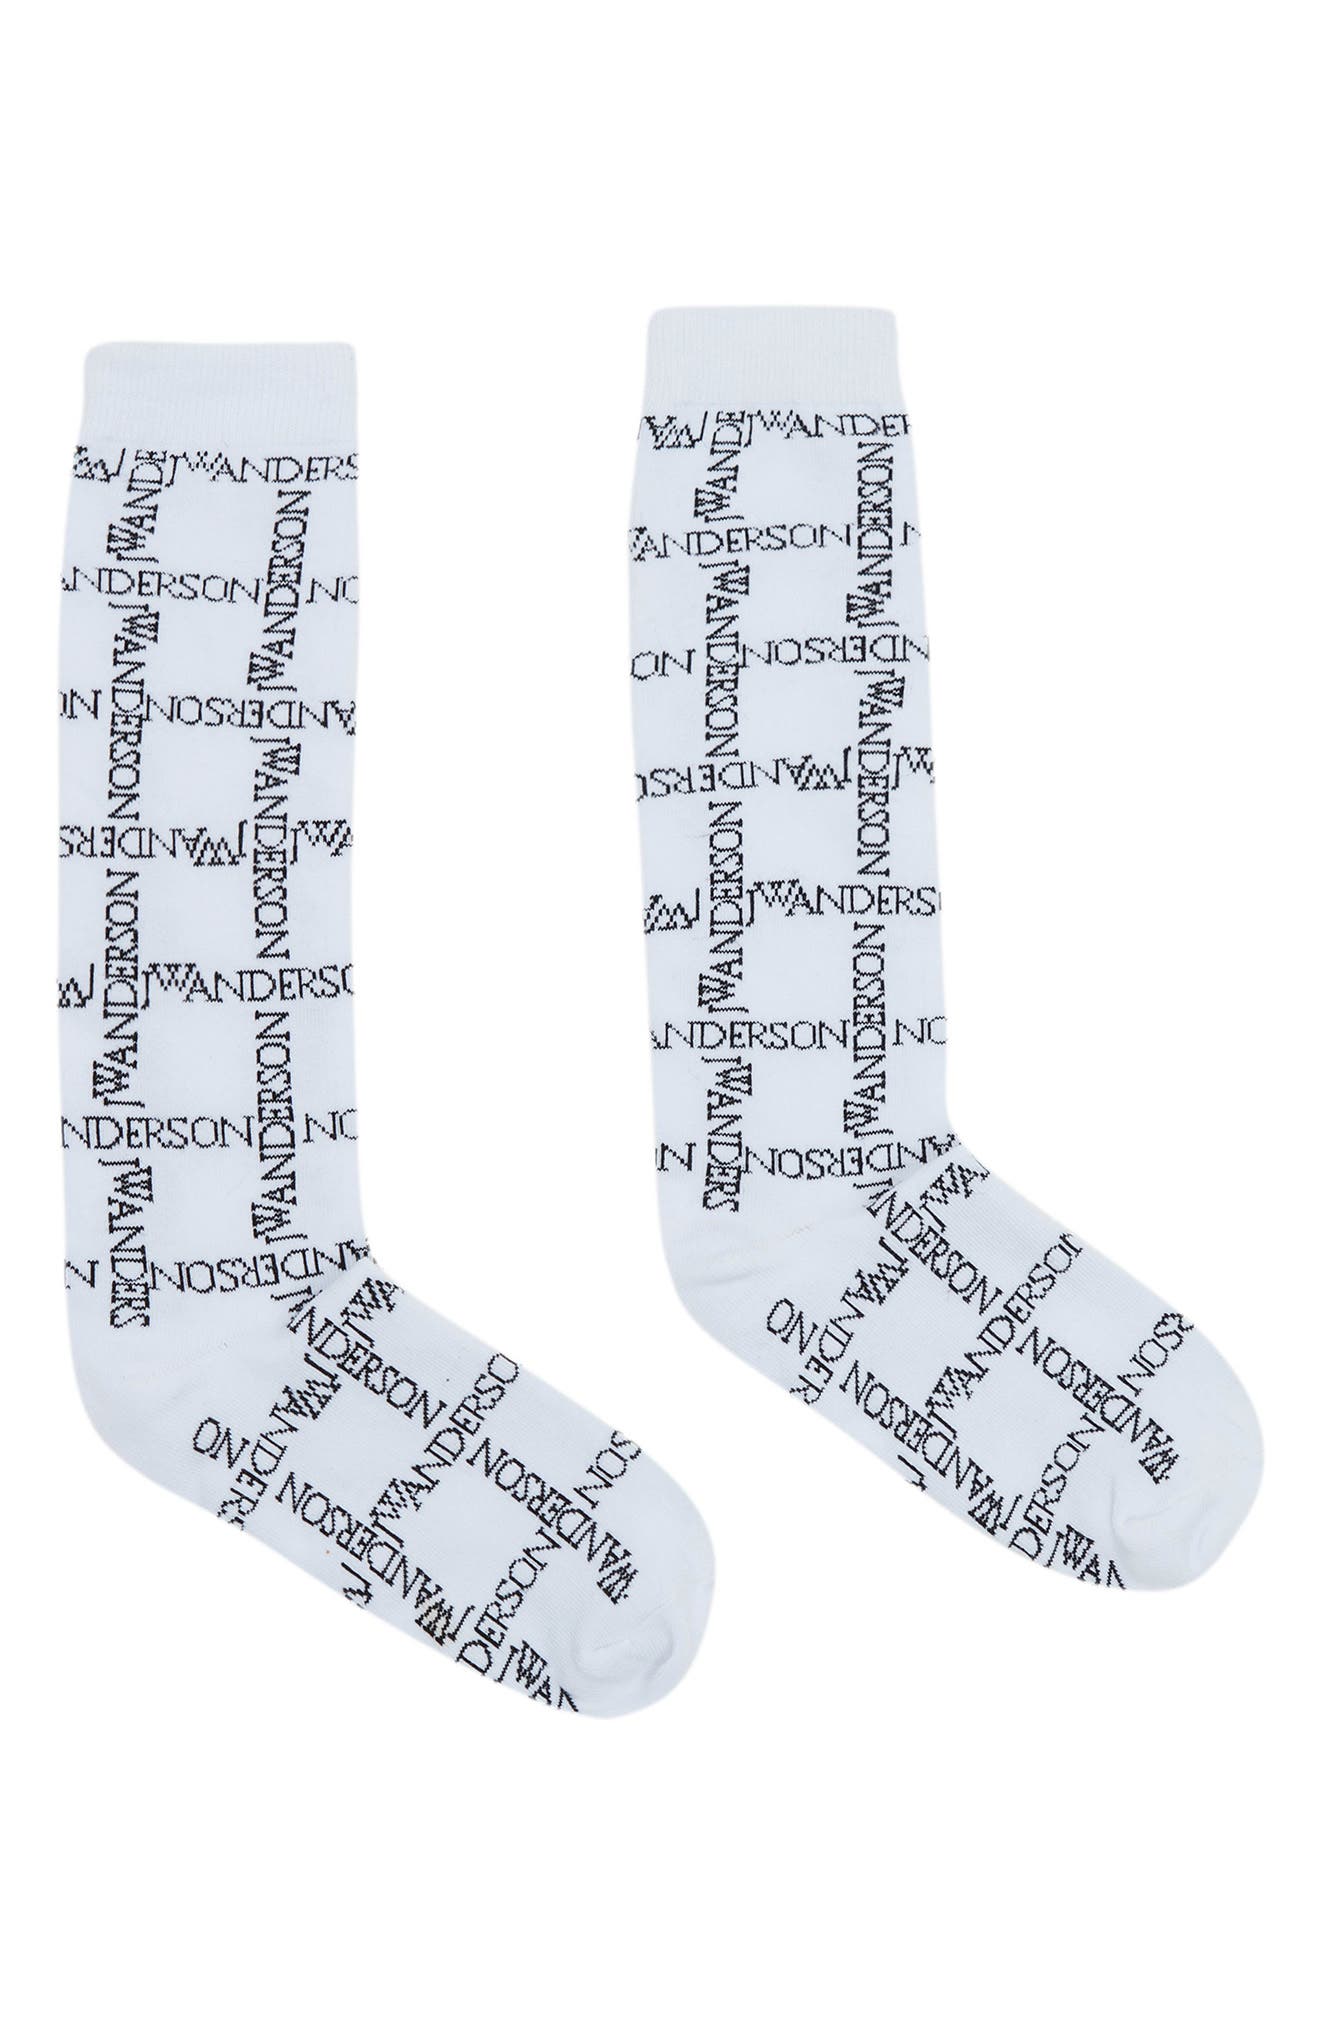 JW Anderson Logo Grid Long Socks in White/Black at Nordstrom, Size Small